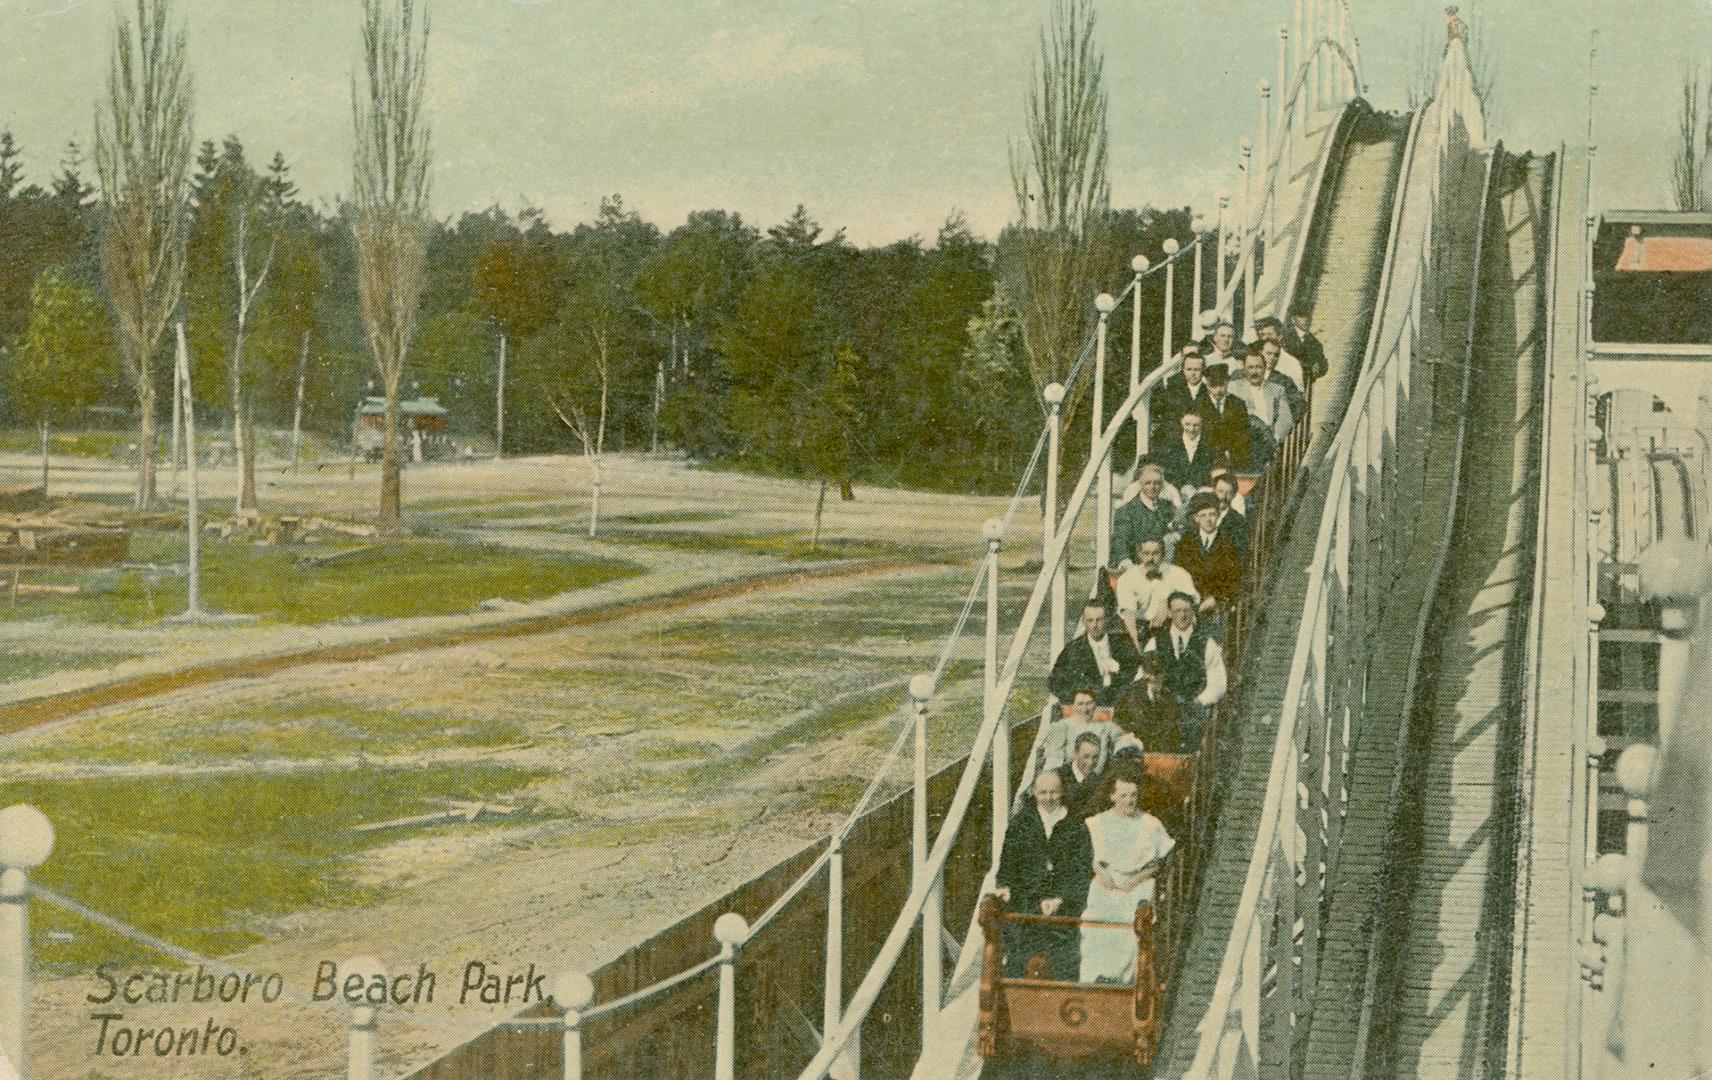 People riding a roller coaster in a park setting.